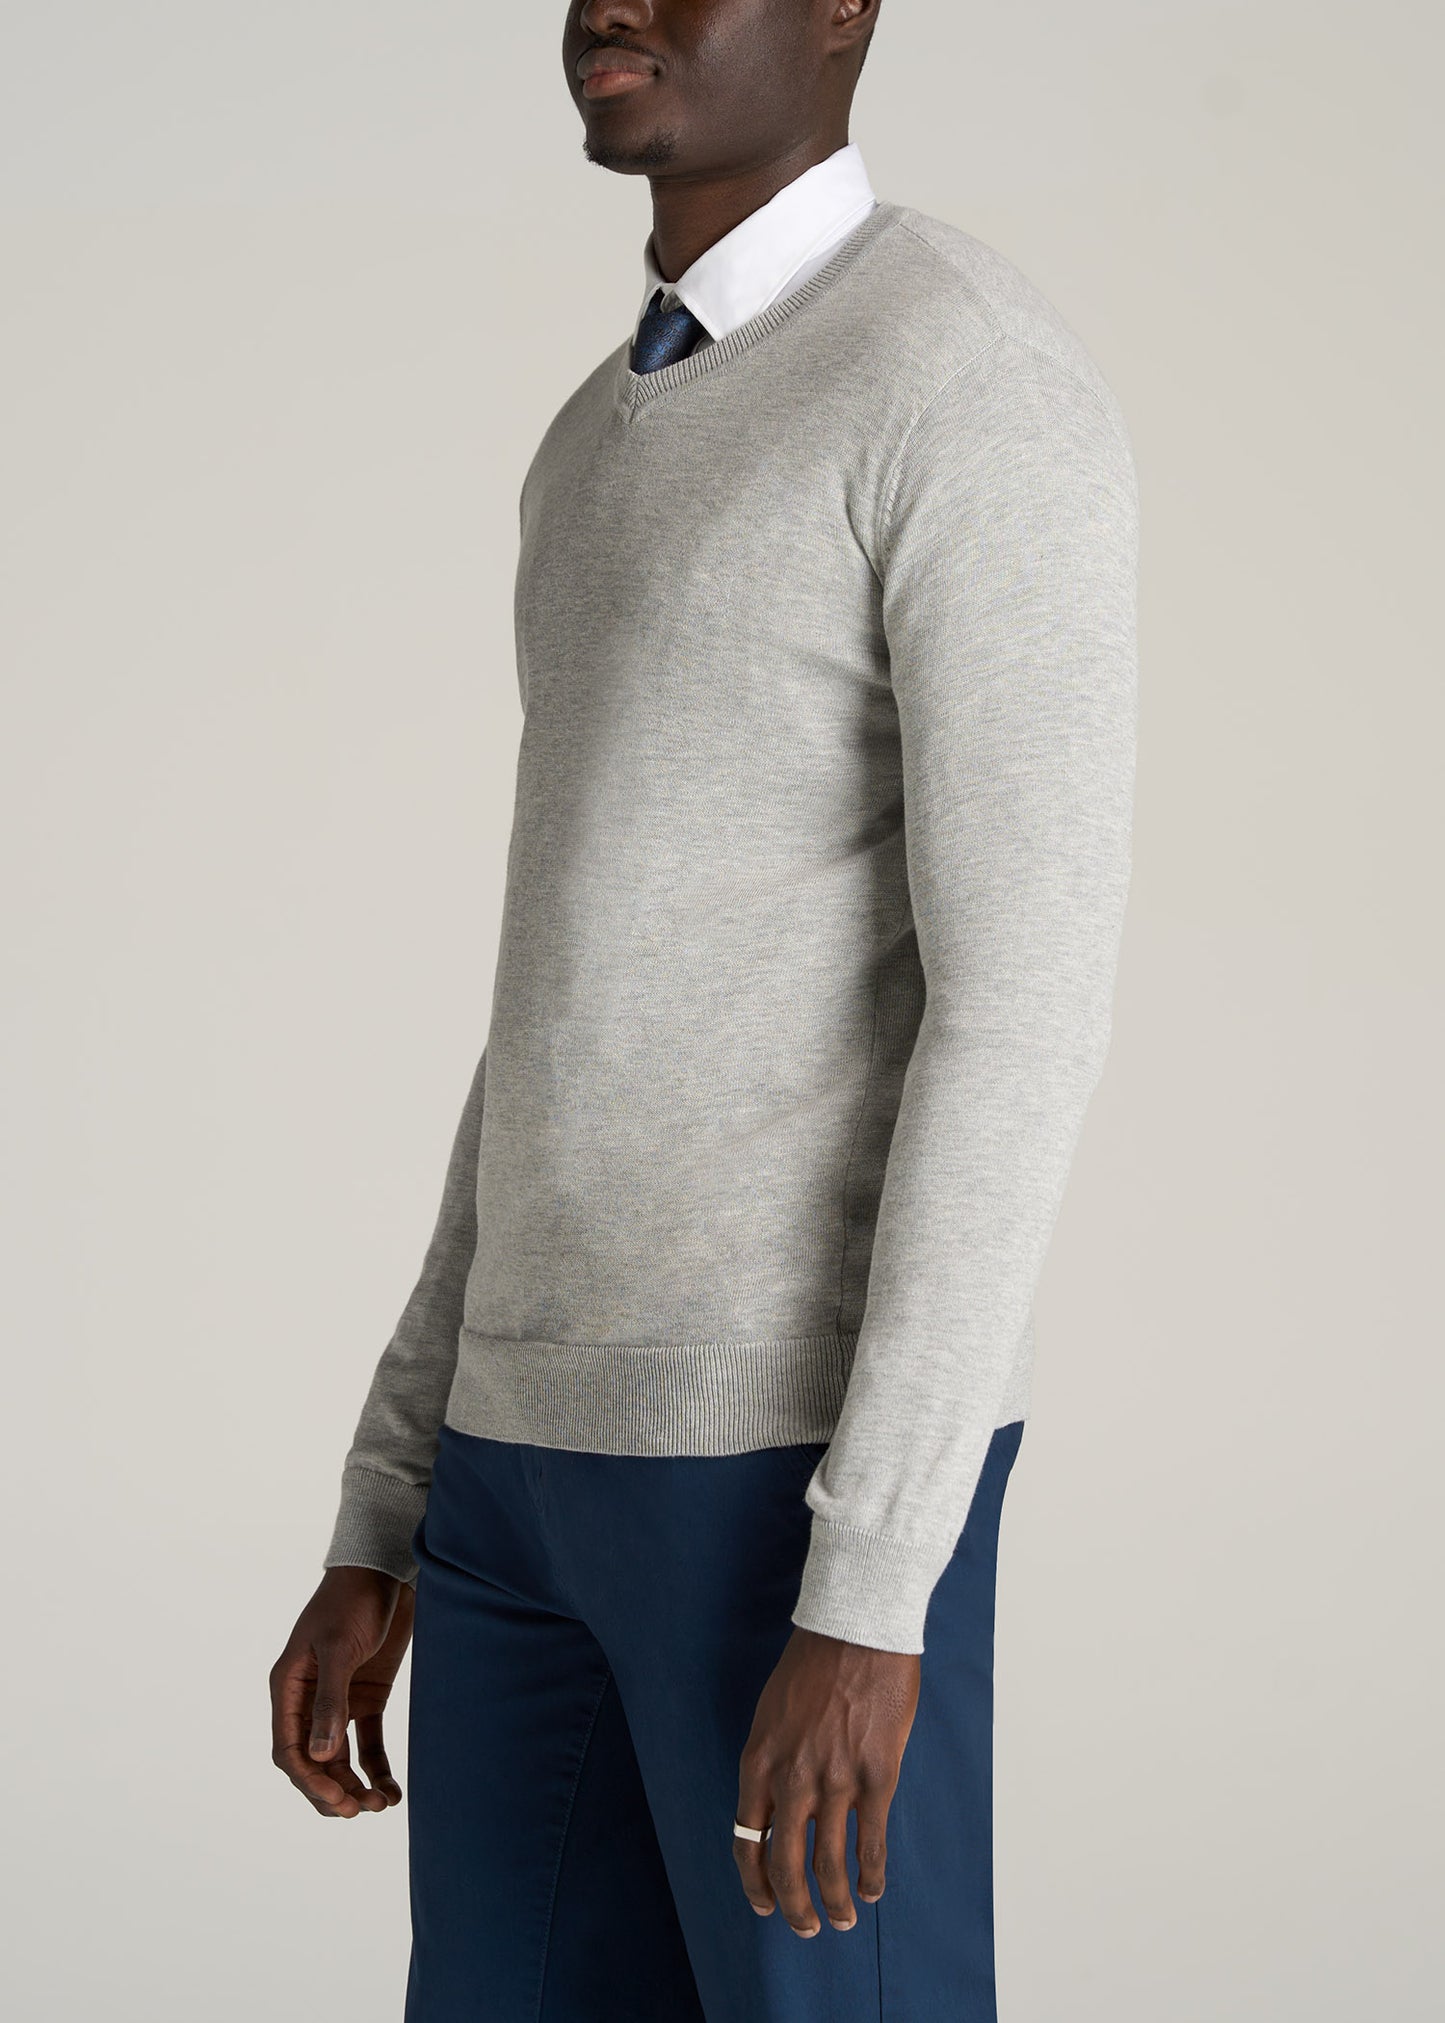    American-Tall-Men-Everyday-V-Neck-Sweater-Grey-Mix-side